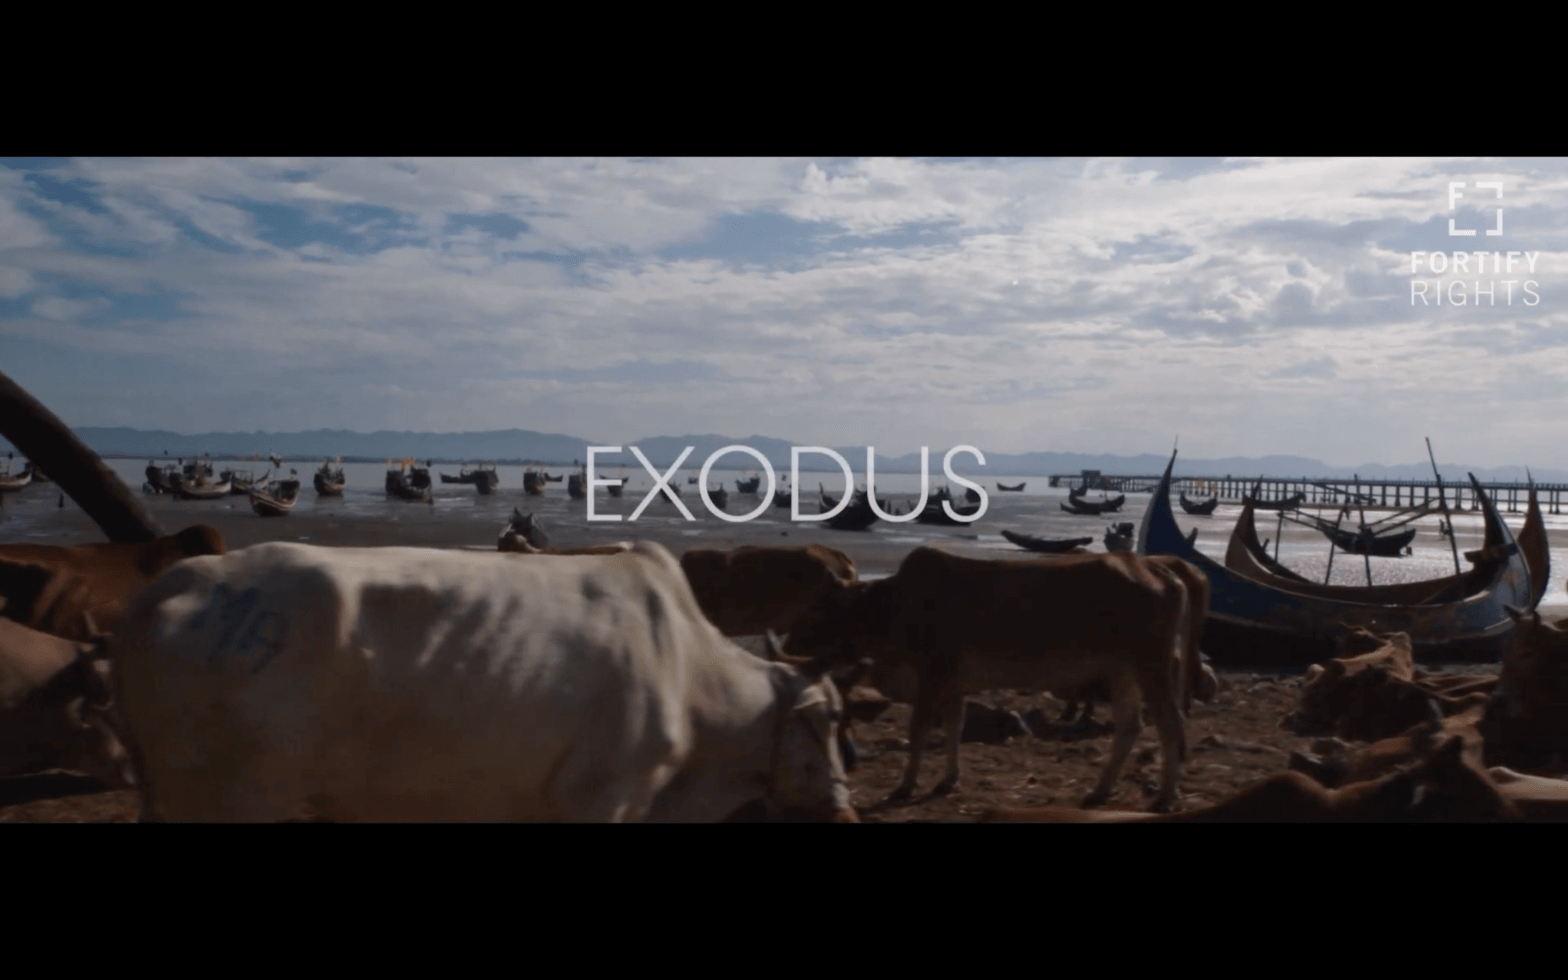 Fortify Rights’s Media Fellow Film “EXODUS” Integrated to UNESCO Spring School 2022 Course 